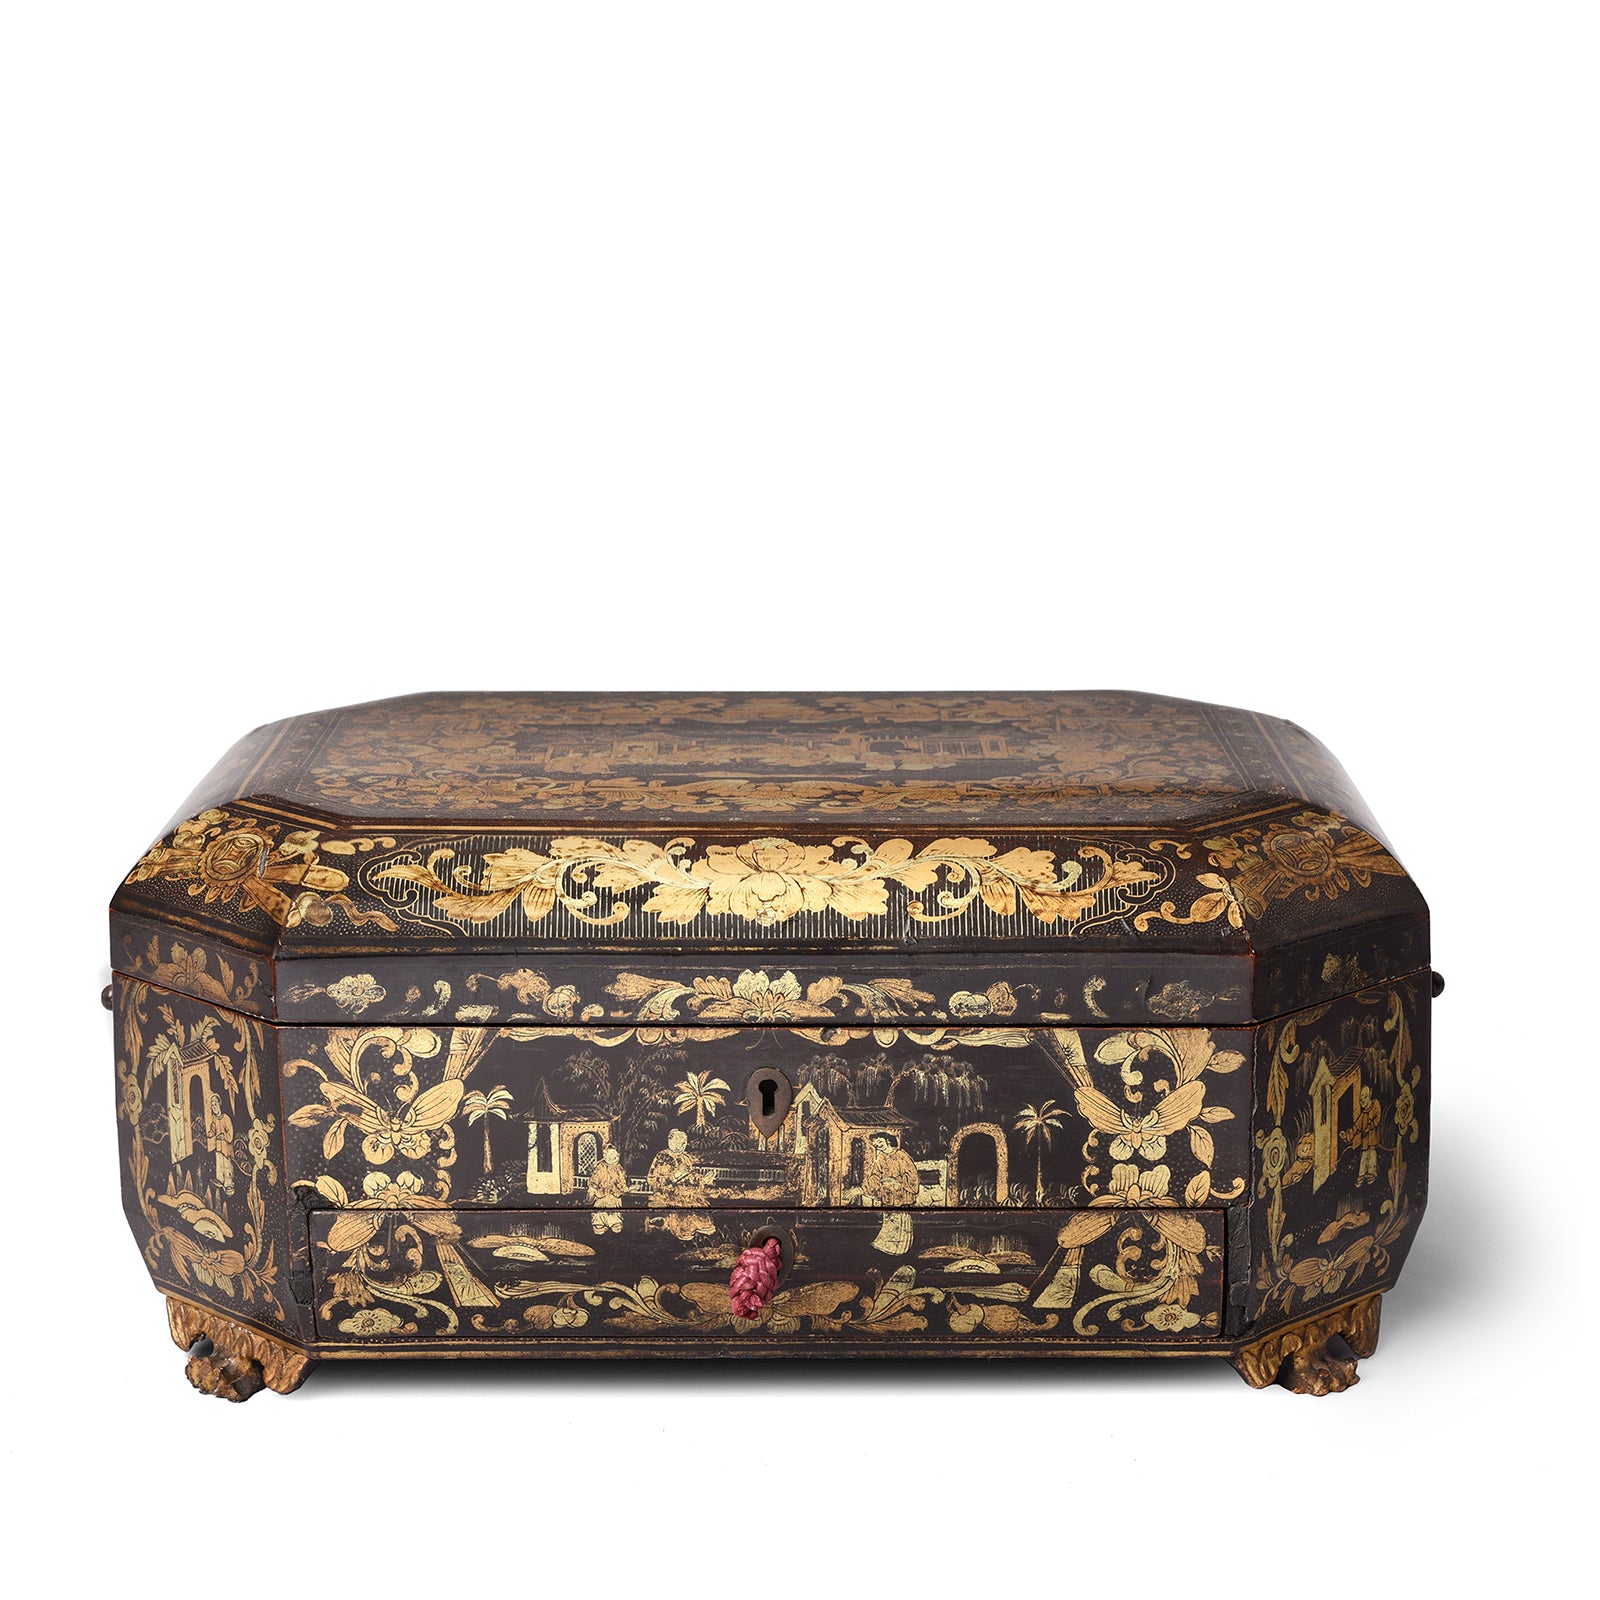 Chinoiserie Lacquer Sewing Box - Qing Dynasty Early 19thC | Indigo Antiques